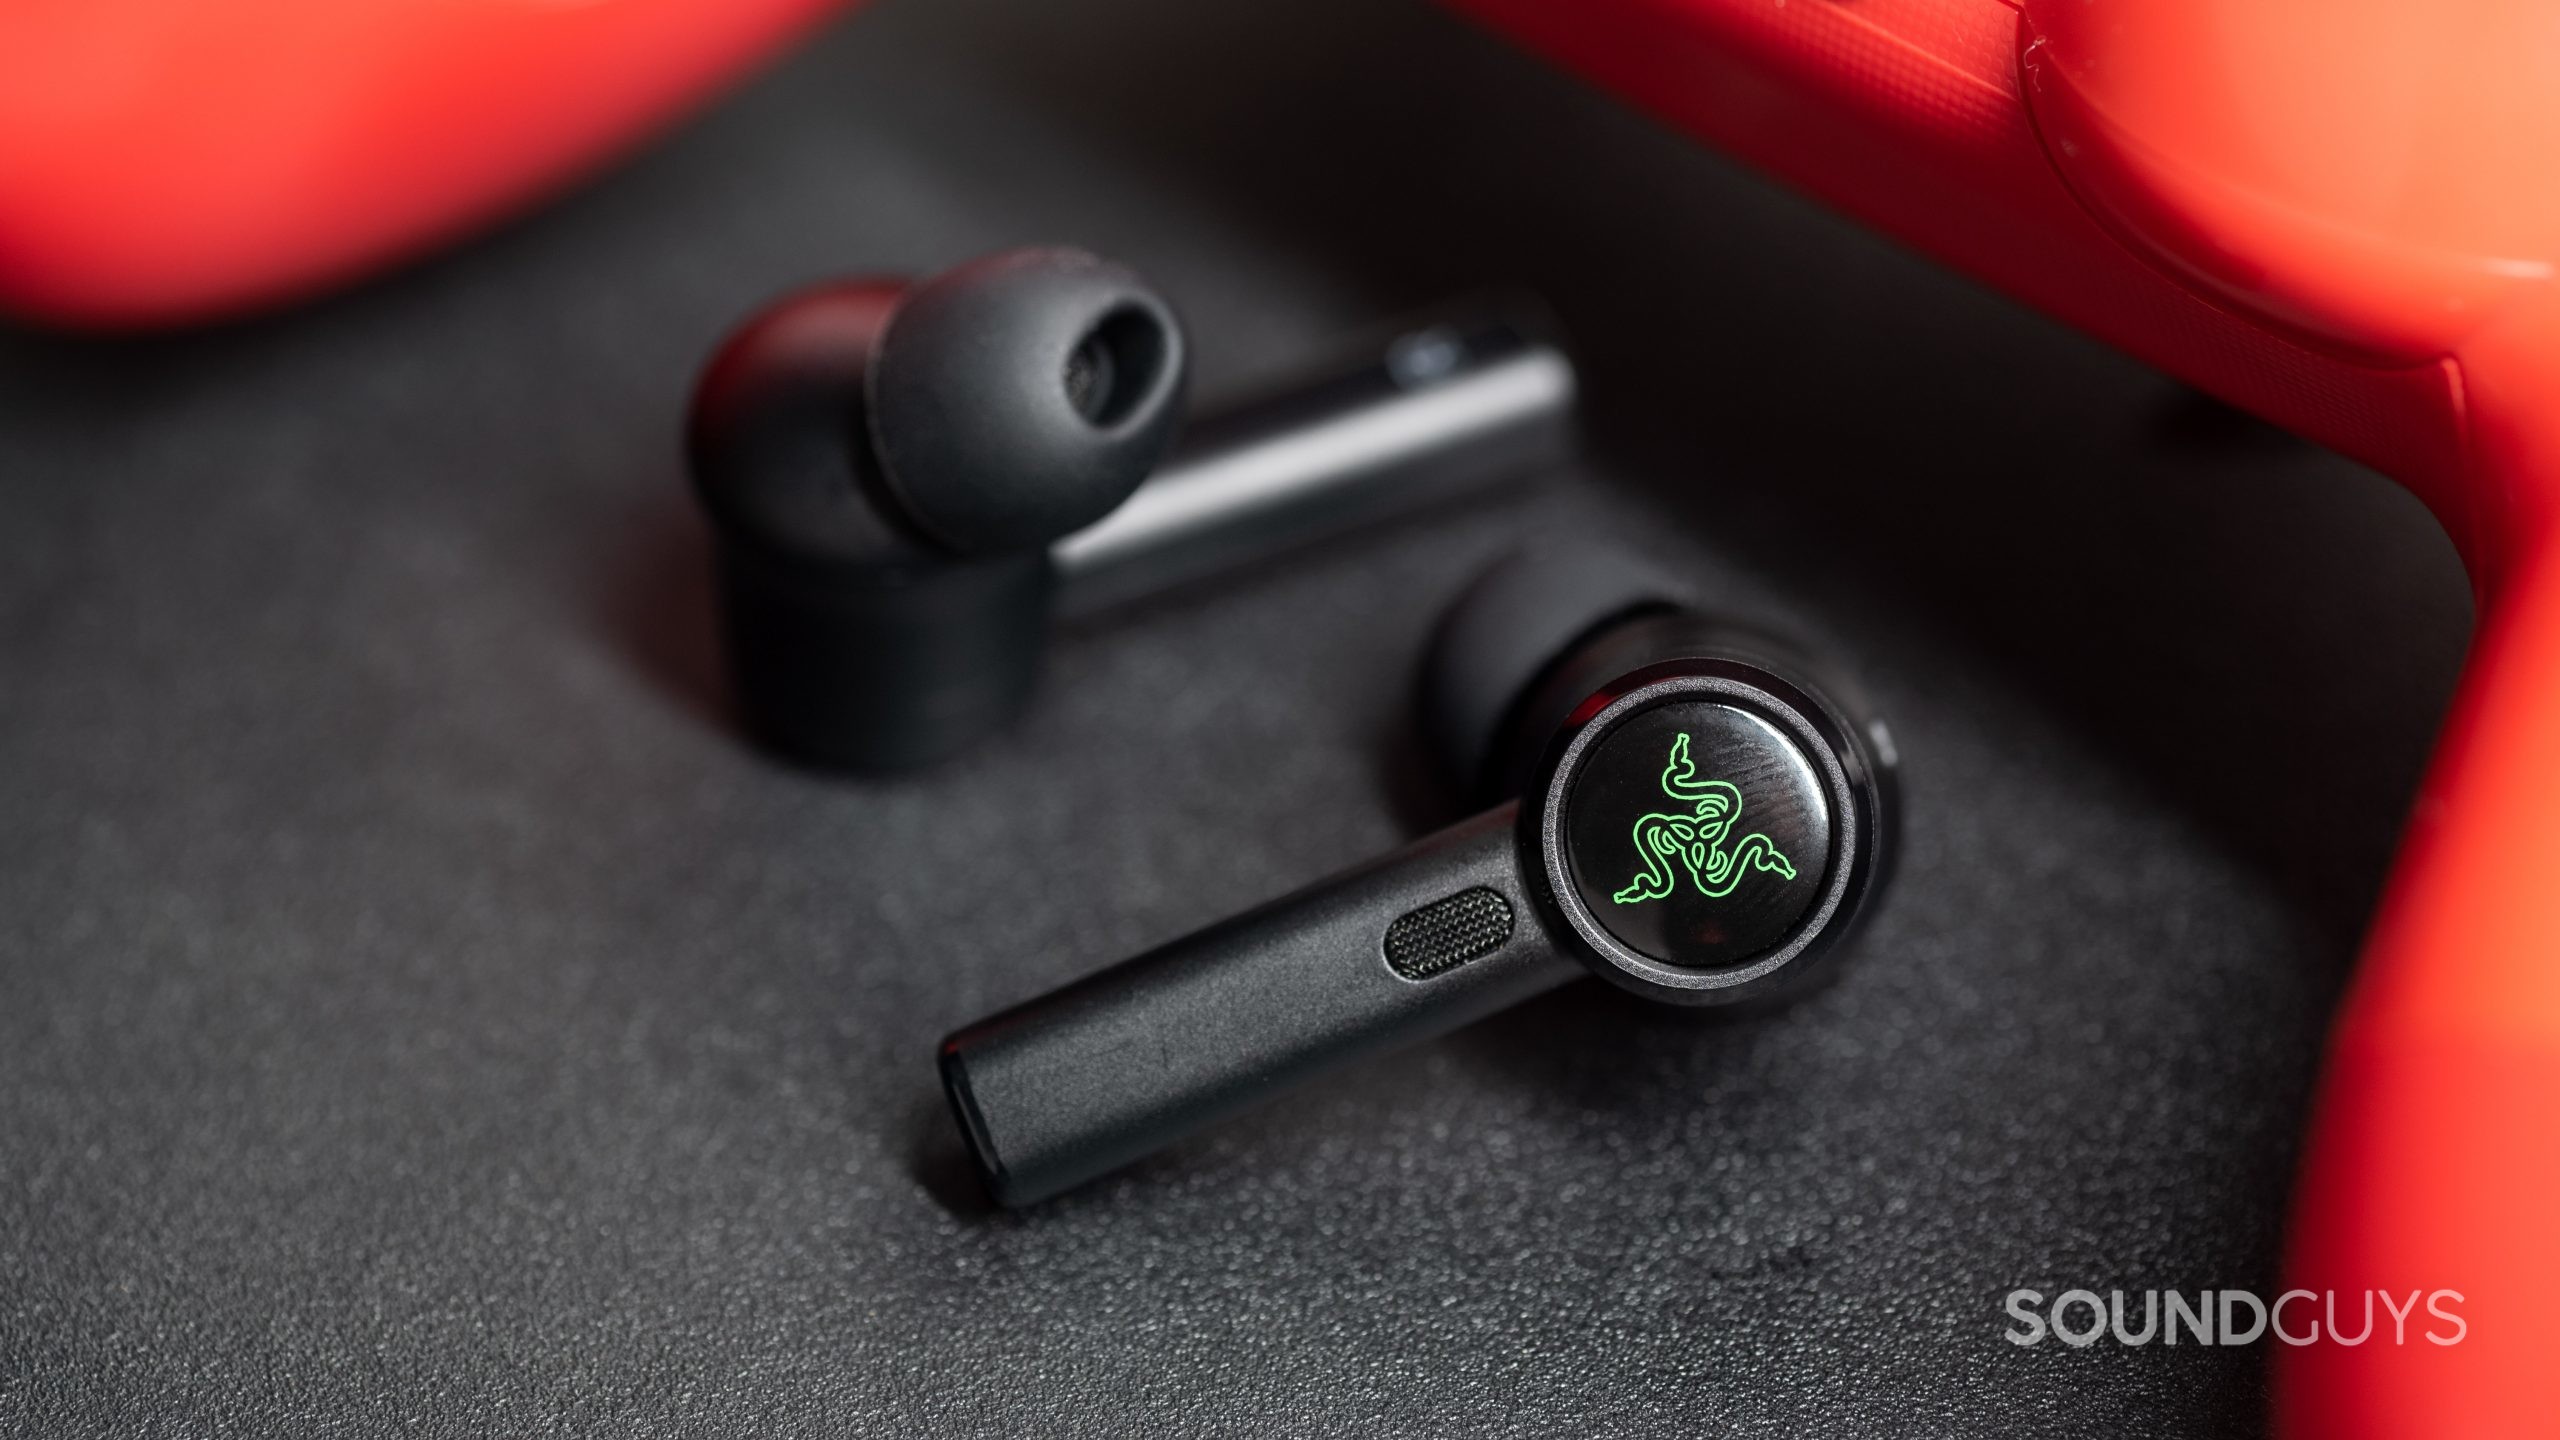 The Razer Hammerhead True Wireless Pro noise canceling earbuds oblong ear tips attached to the buds beneath a PlayStation 4 controller in red.